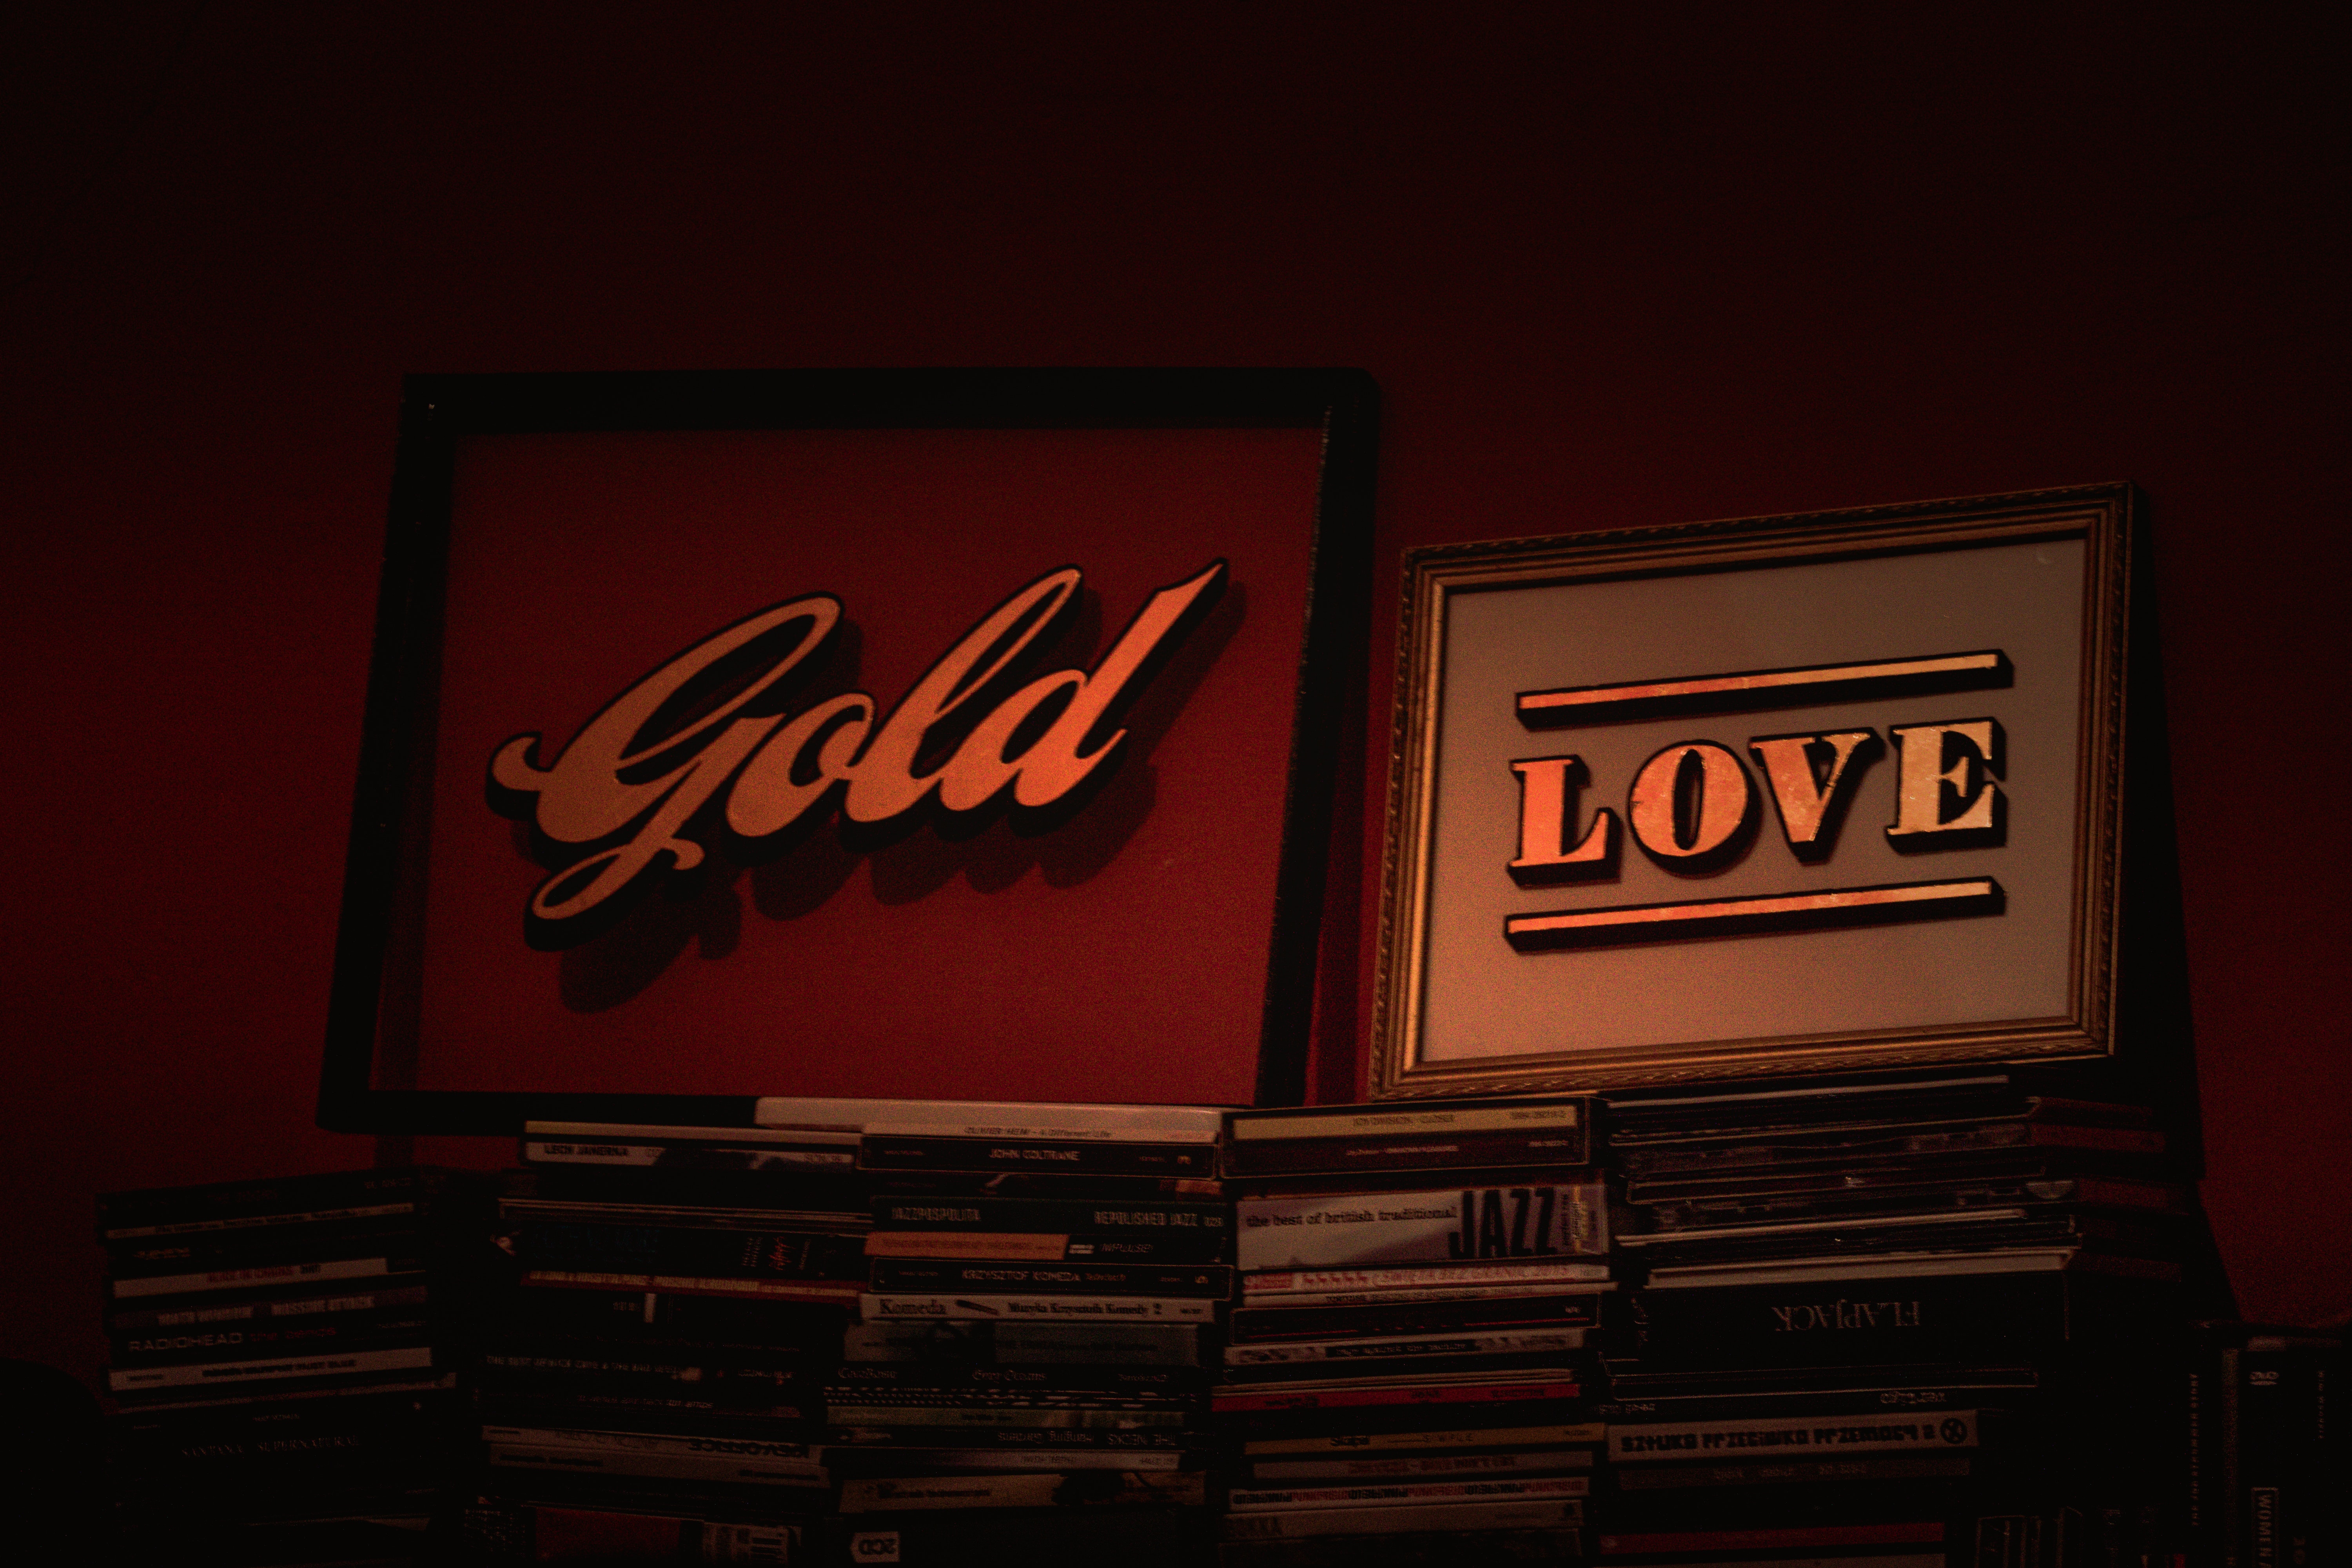 Gold and love posters with frames photo